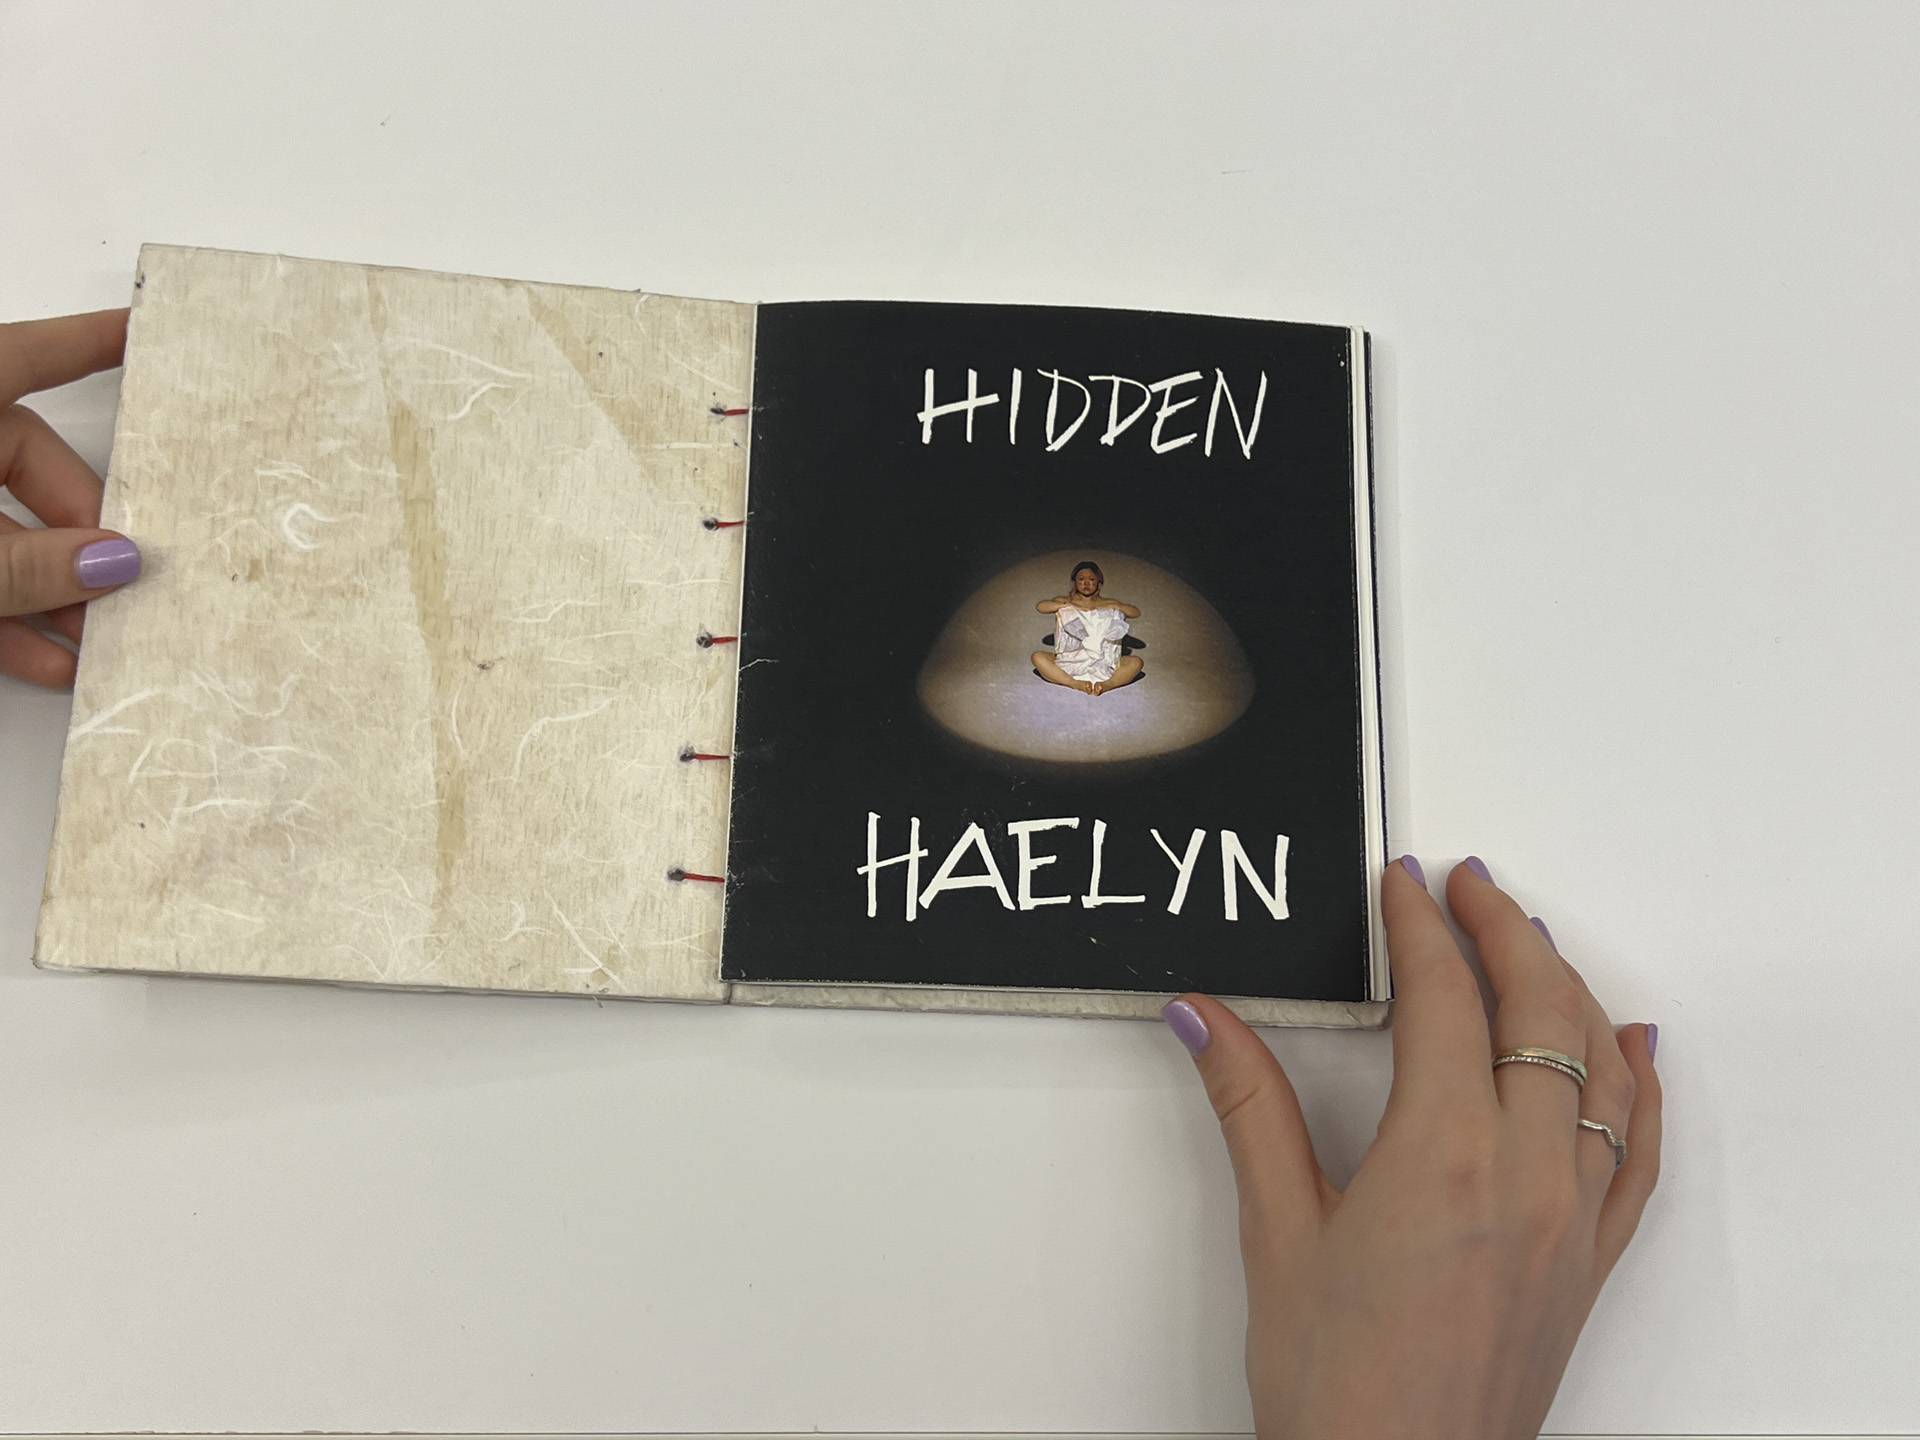 photo of a book opened with words "hidden haelyn" overlaid with photo of a woman